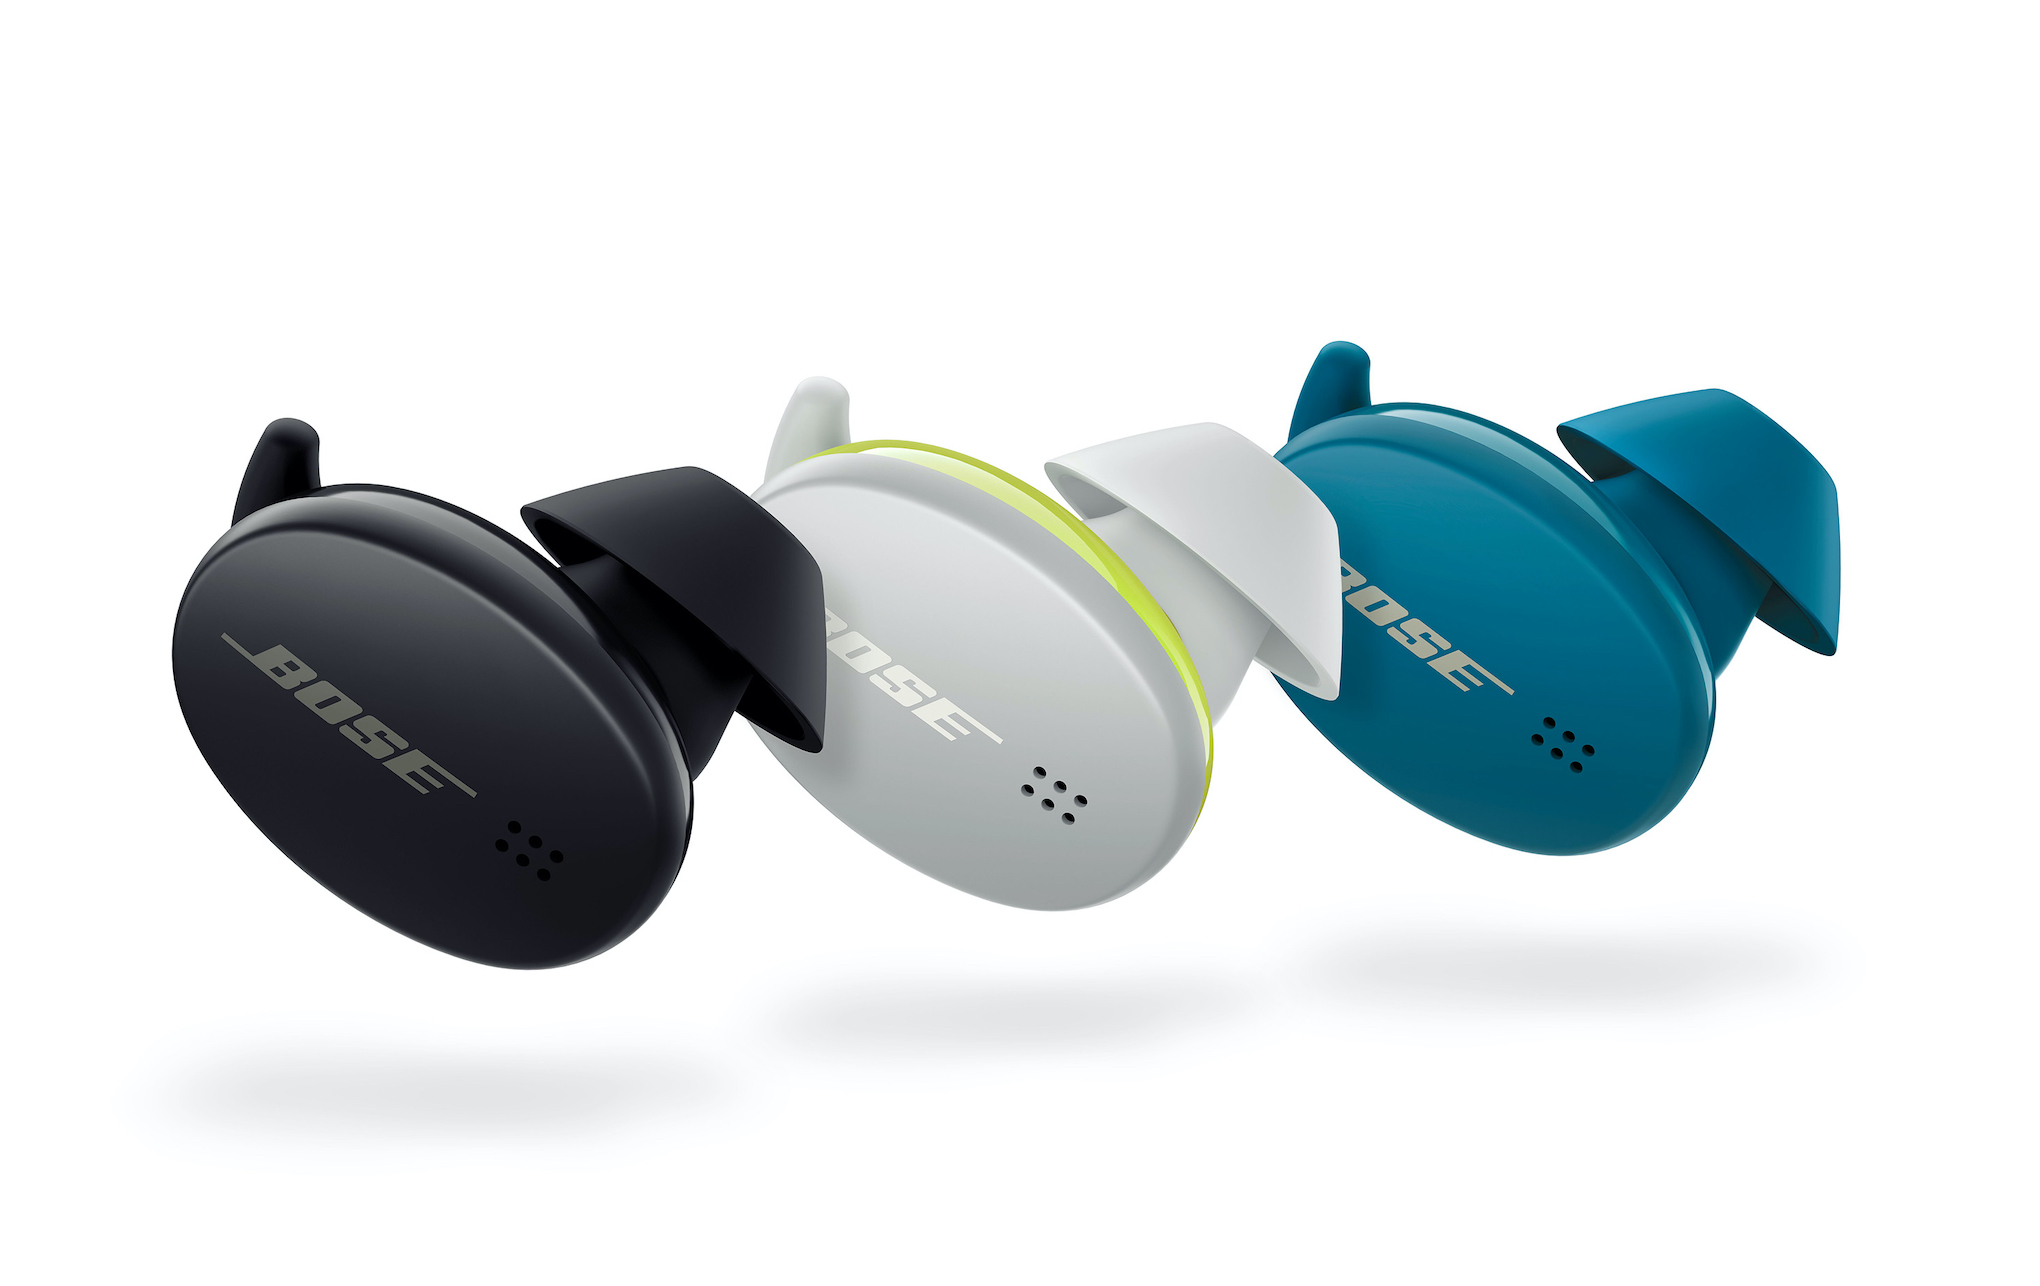 Bose introduced two pairs of wireless headphones: QuietComfort Earbuds